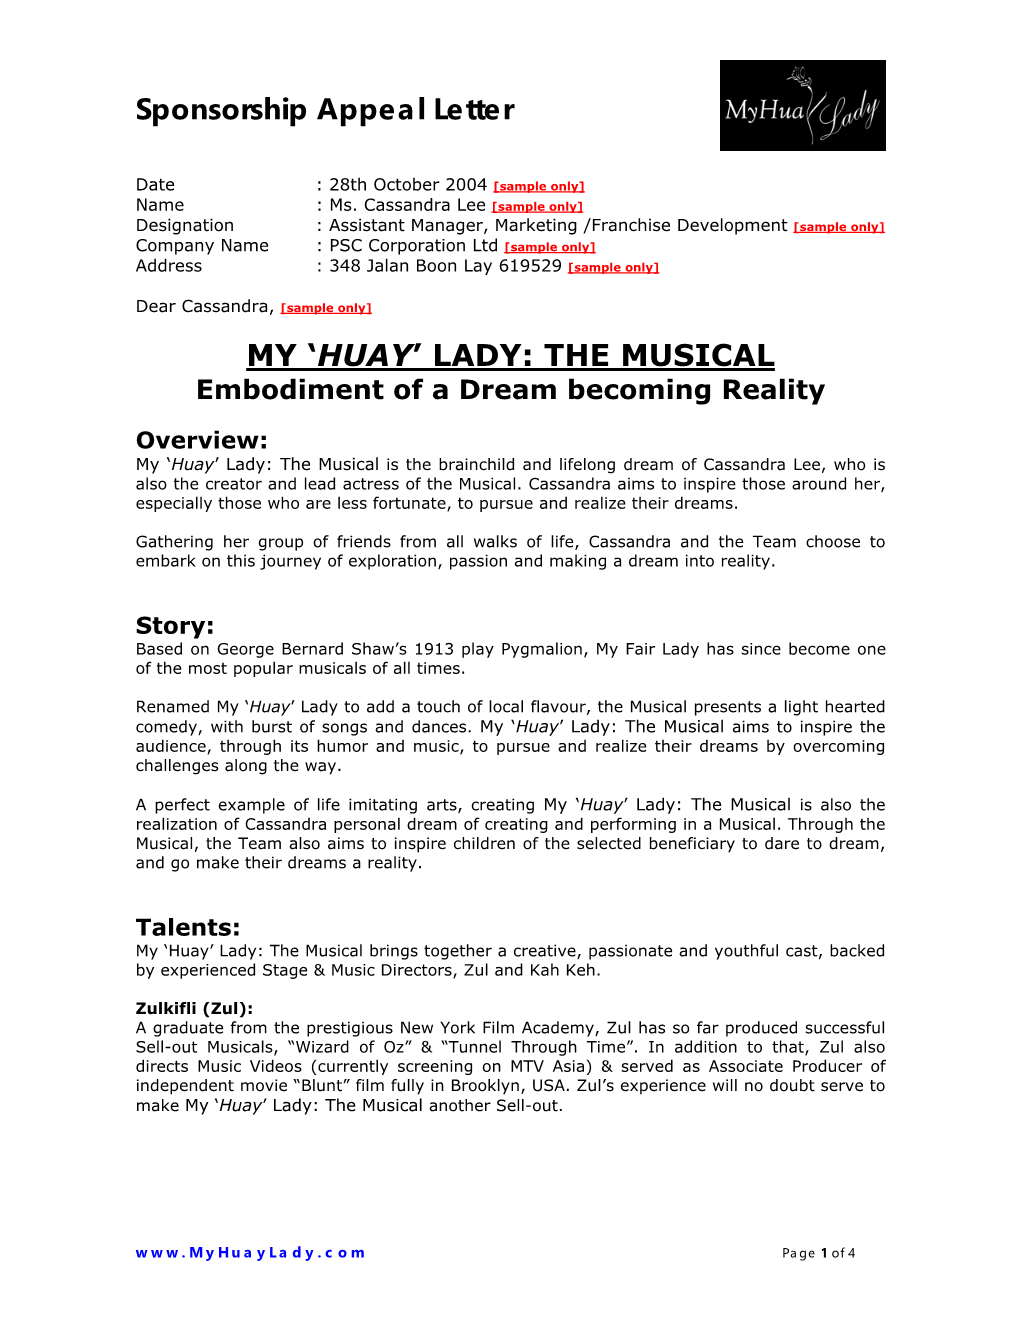 Sponsorship Appeal Letter MY 'HUAY' LADY: the MUSICAL